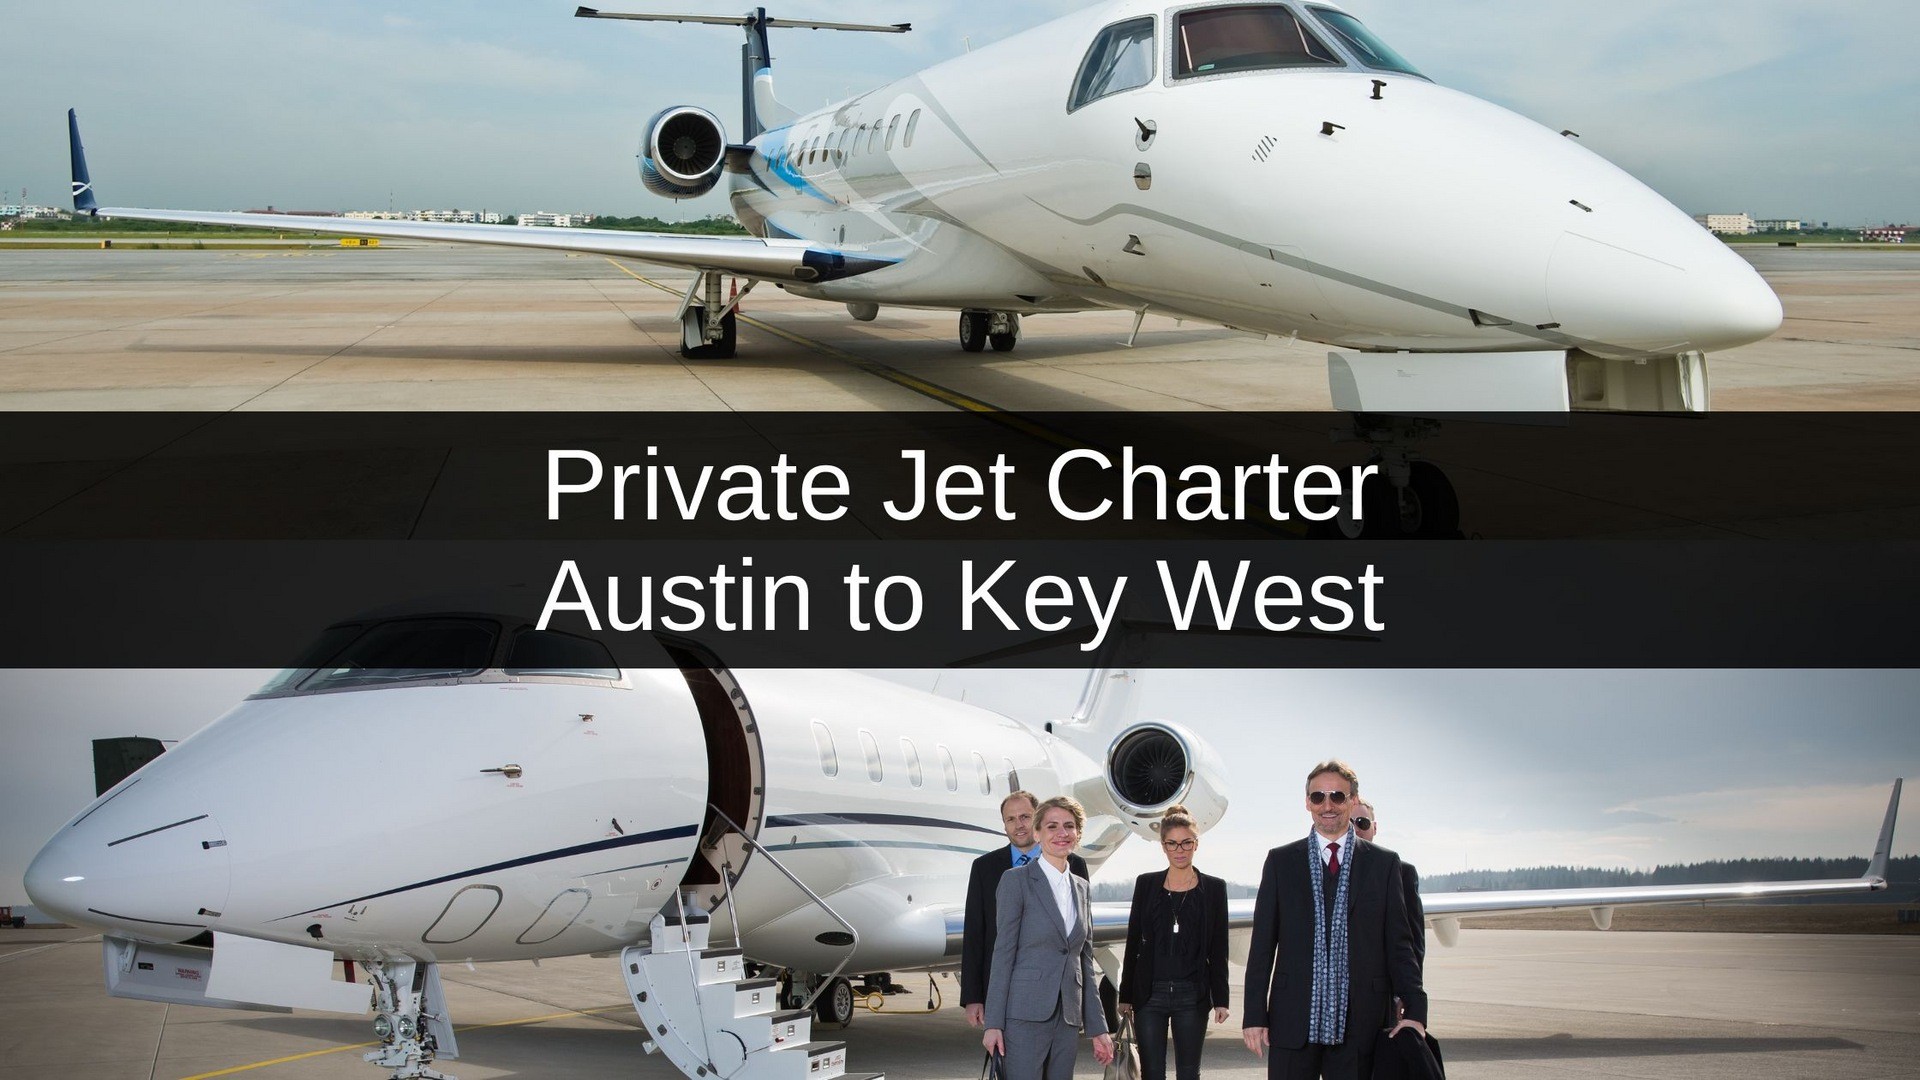 Private Jet Charter from Austin to Key West